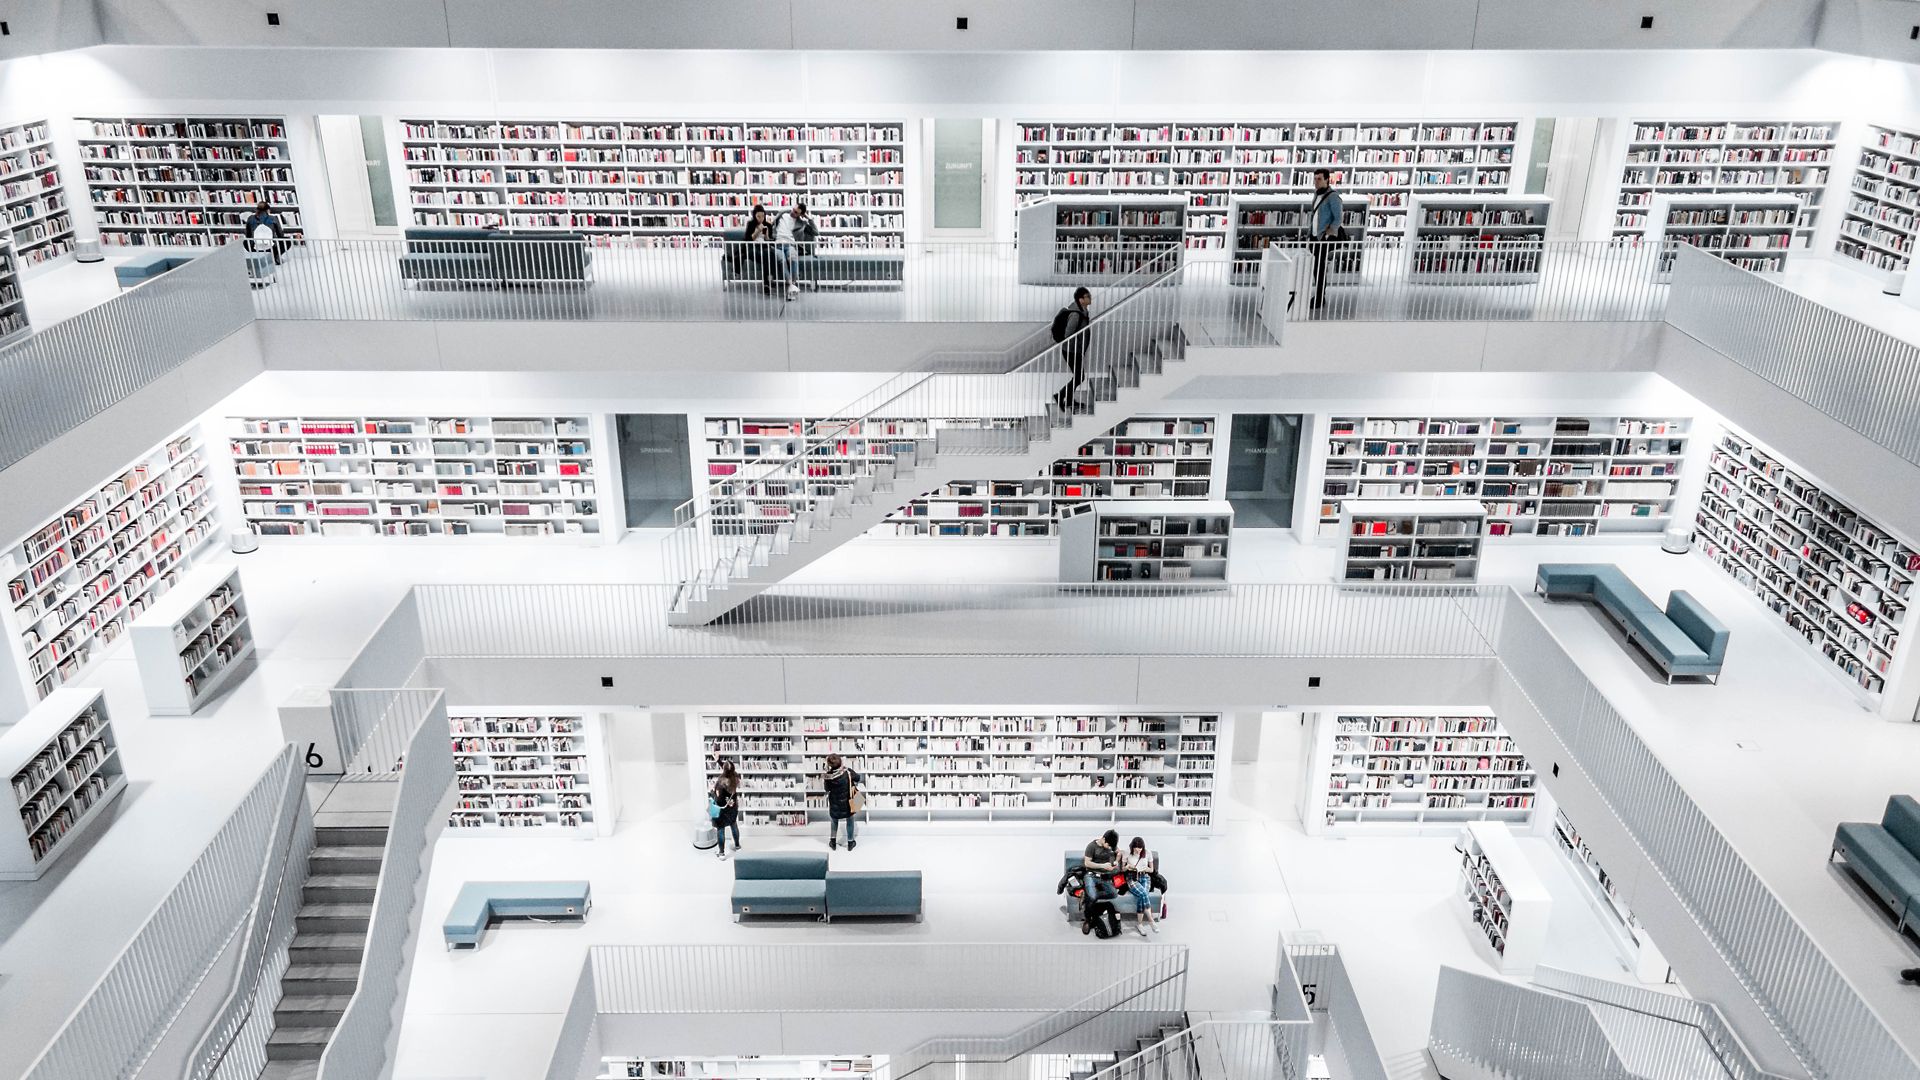 People browsing modern library, photo by Christian Wiediger on Unsplash